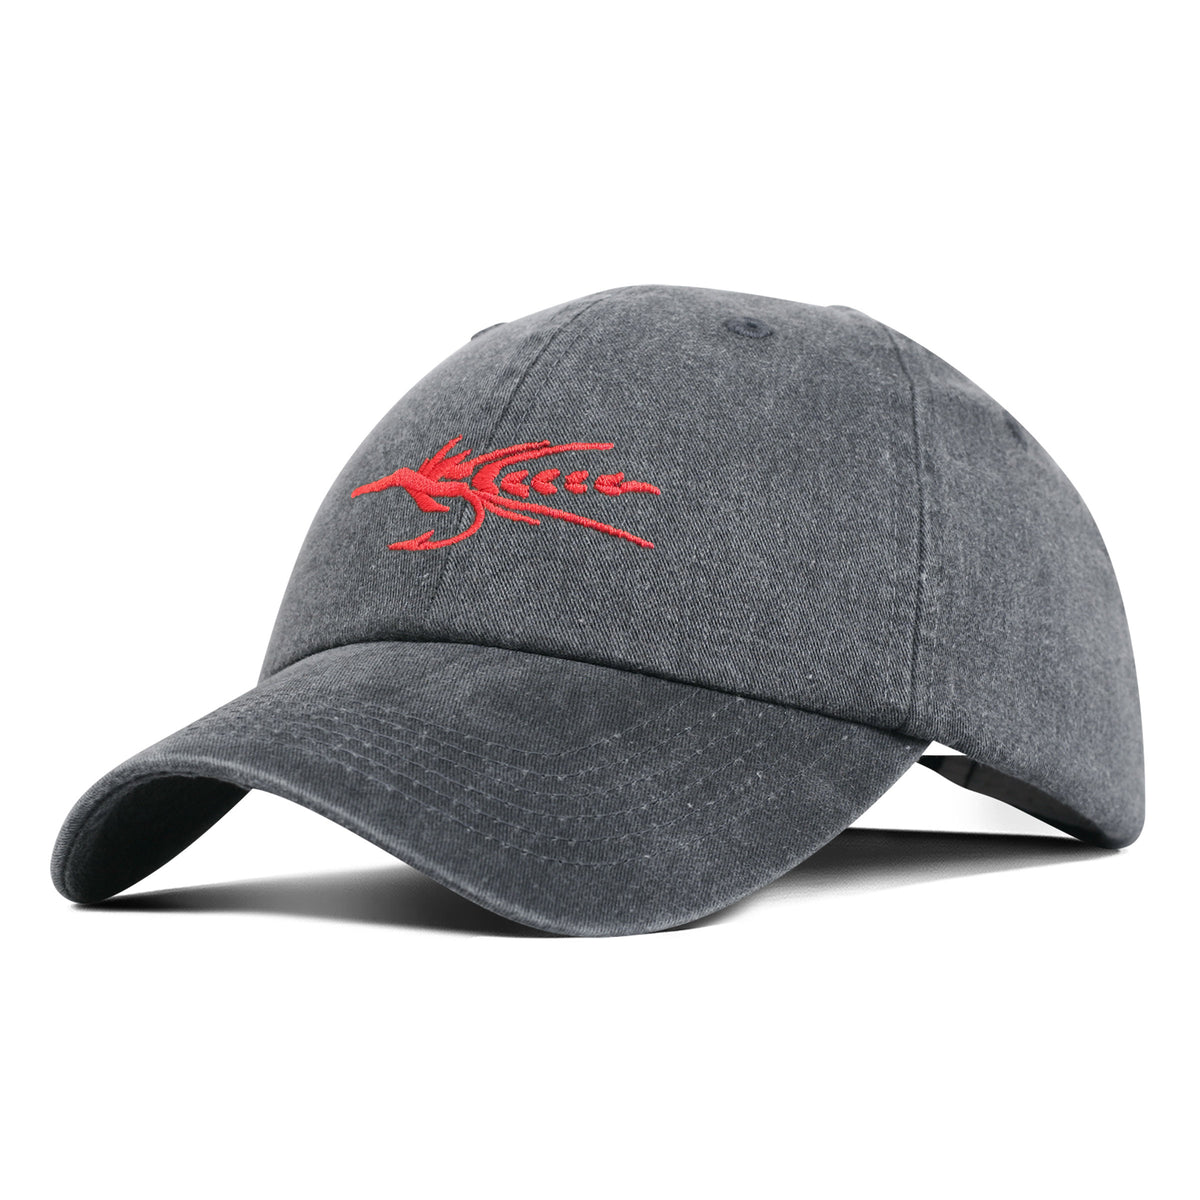 Black Fly Embroidered Hat Charcoal/Red Fly